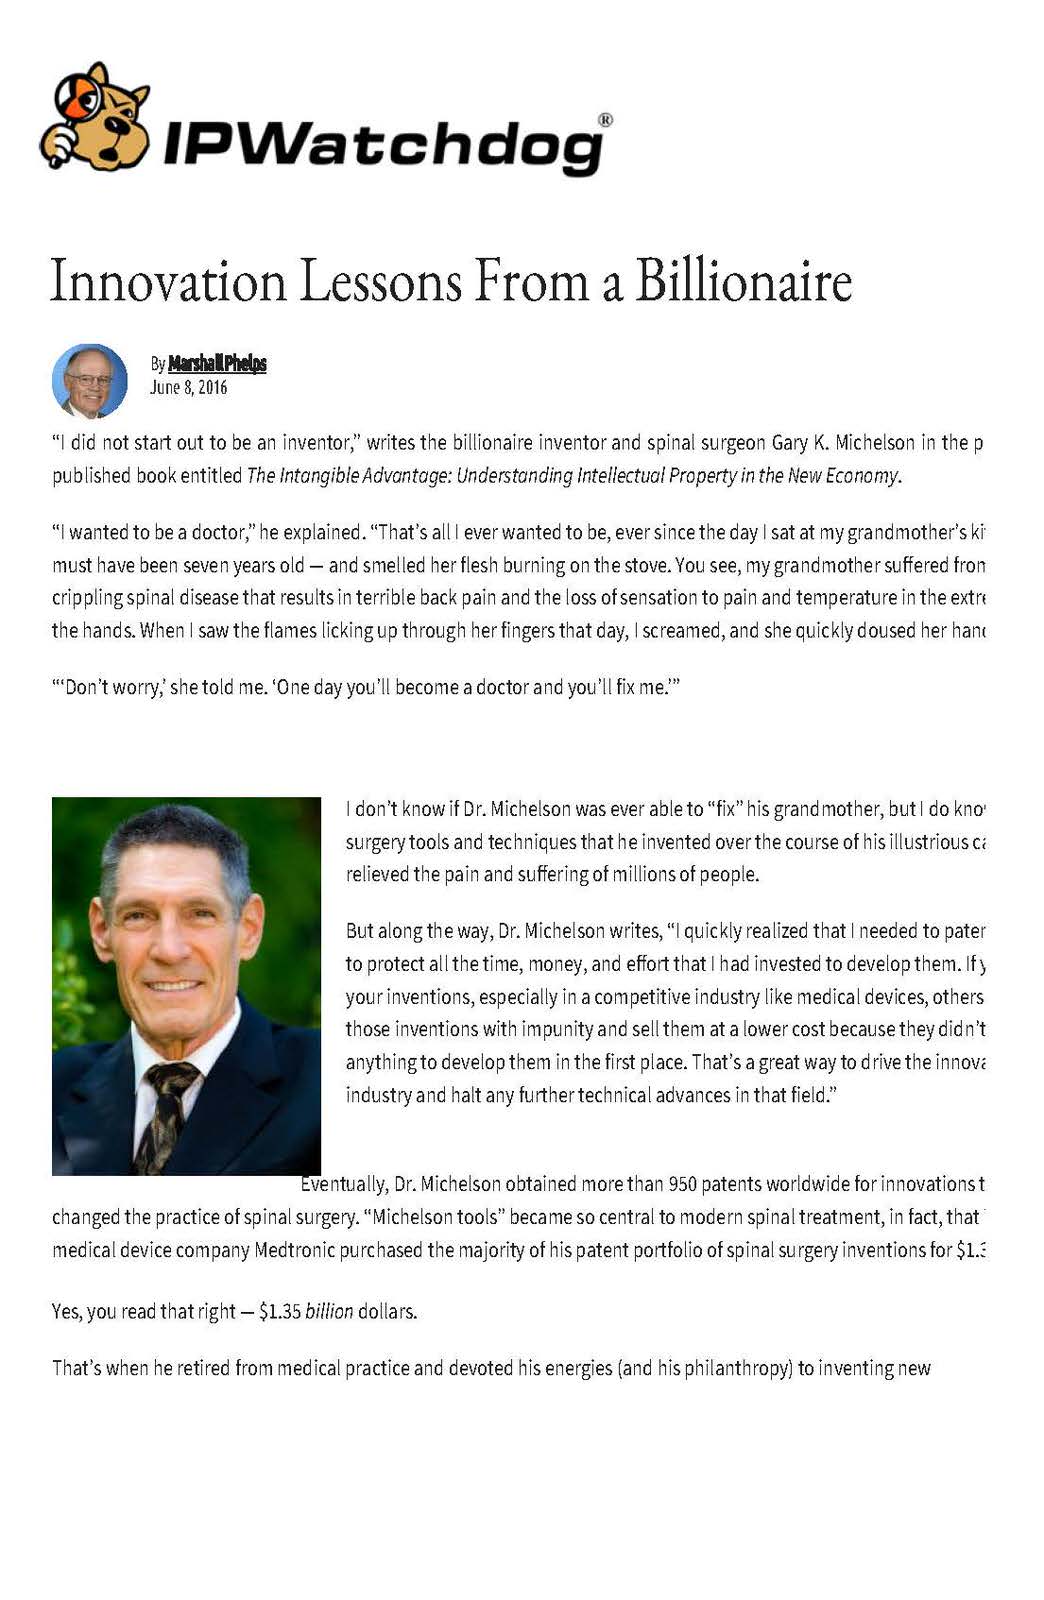 [Pg1] Innovation Lessons From a Billionaire | IP Watchdog